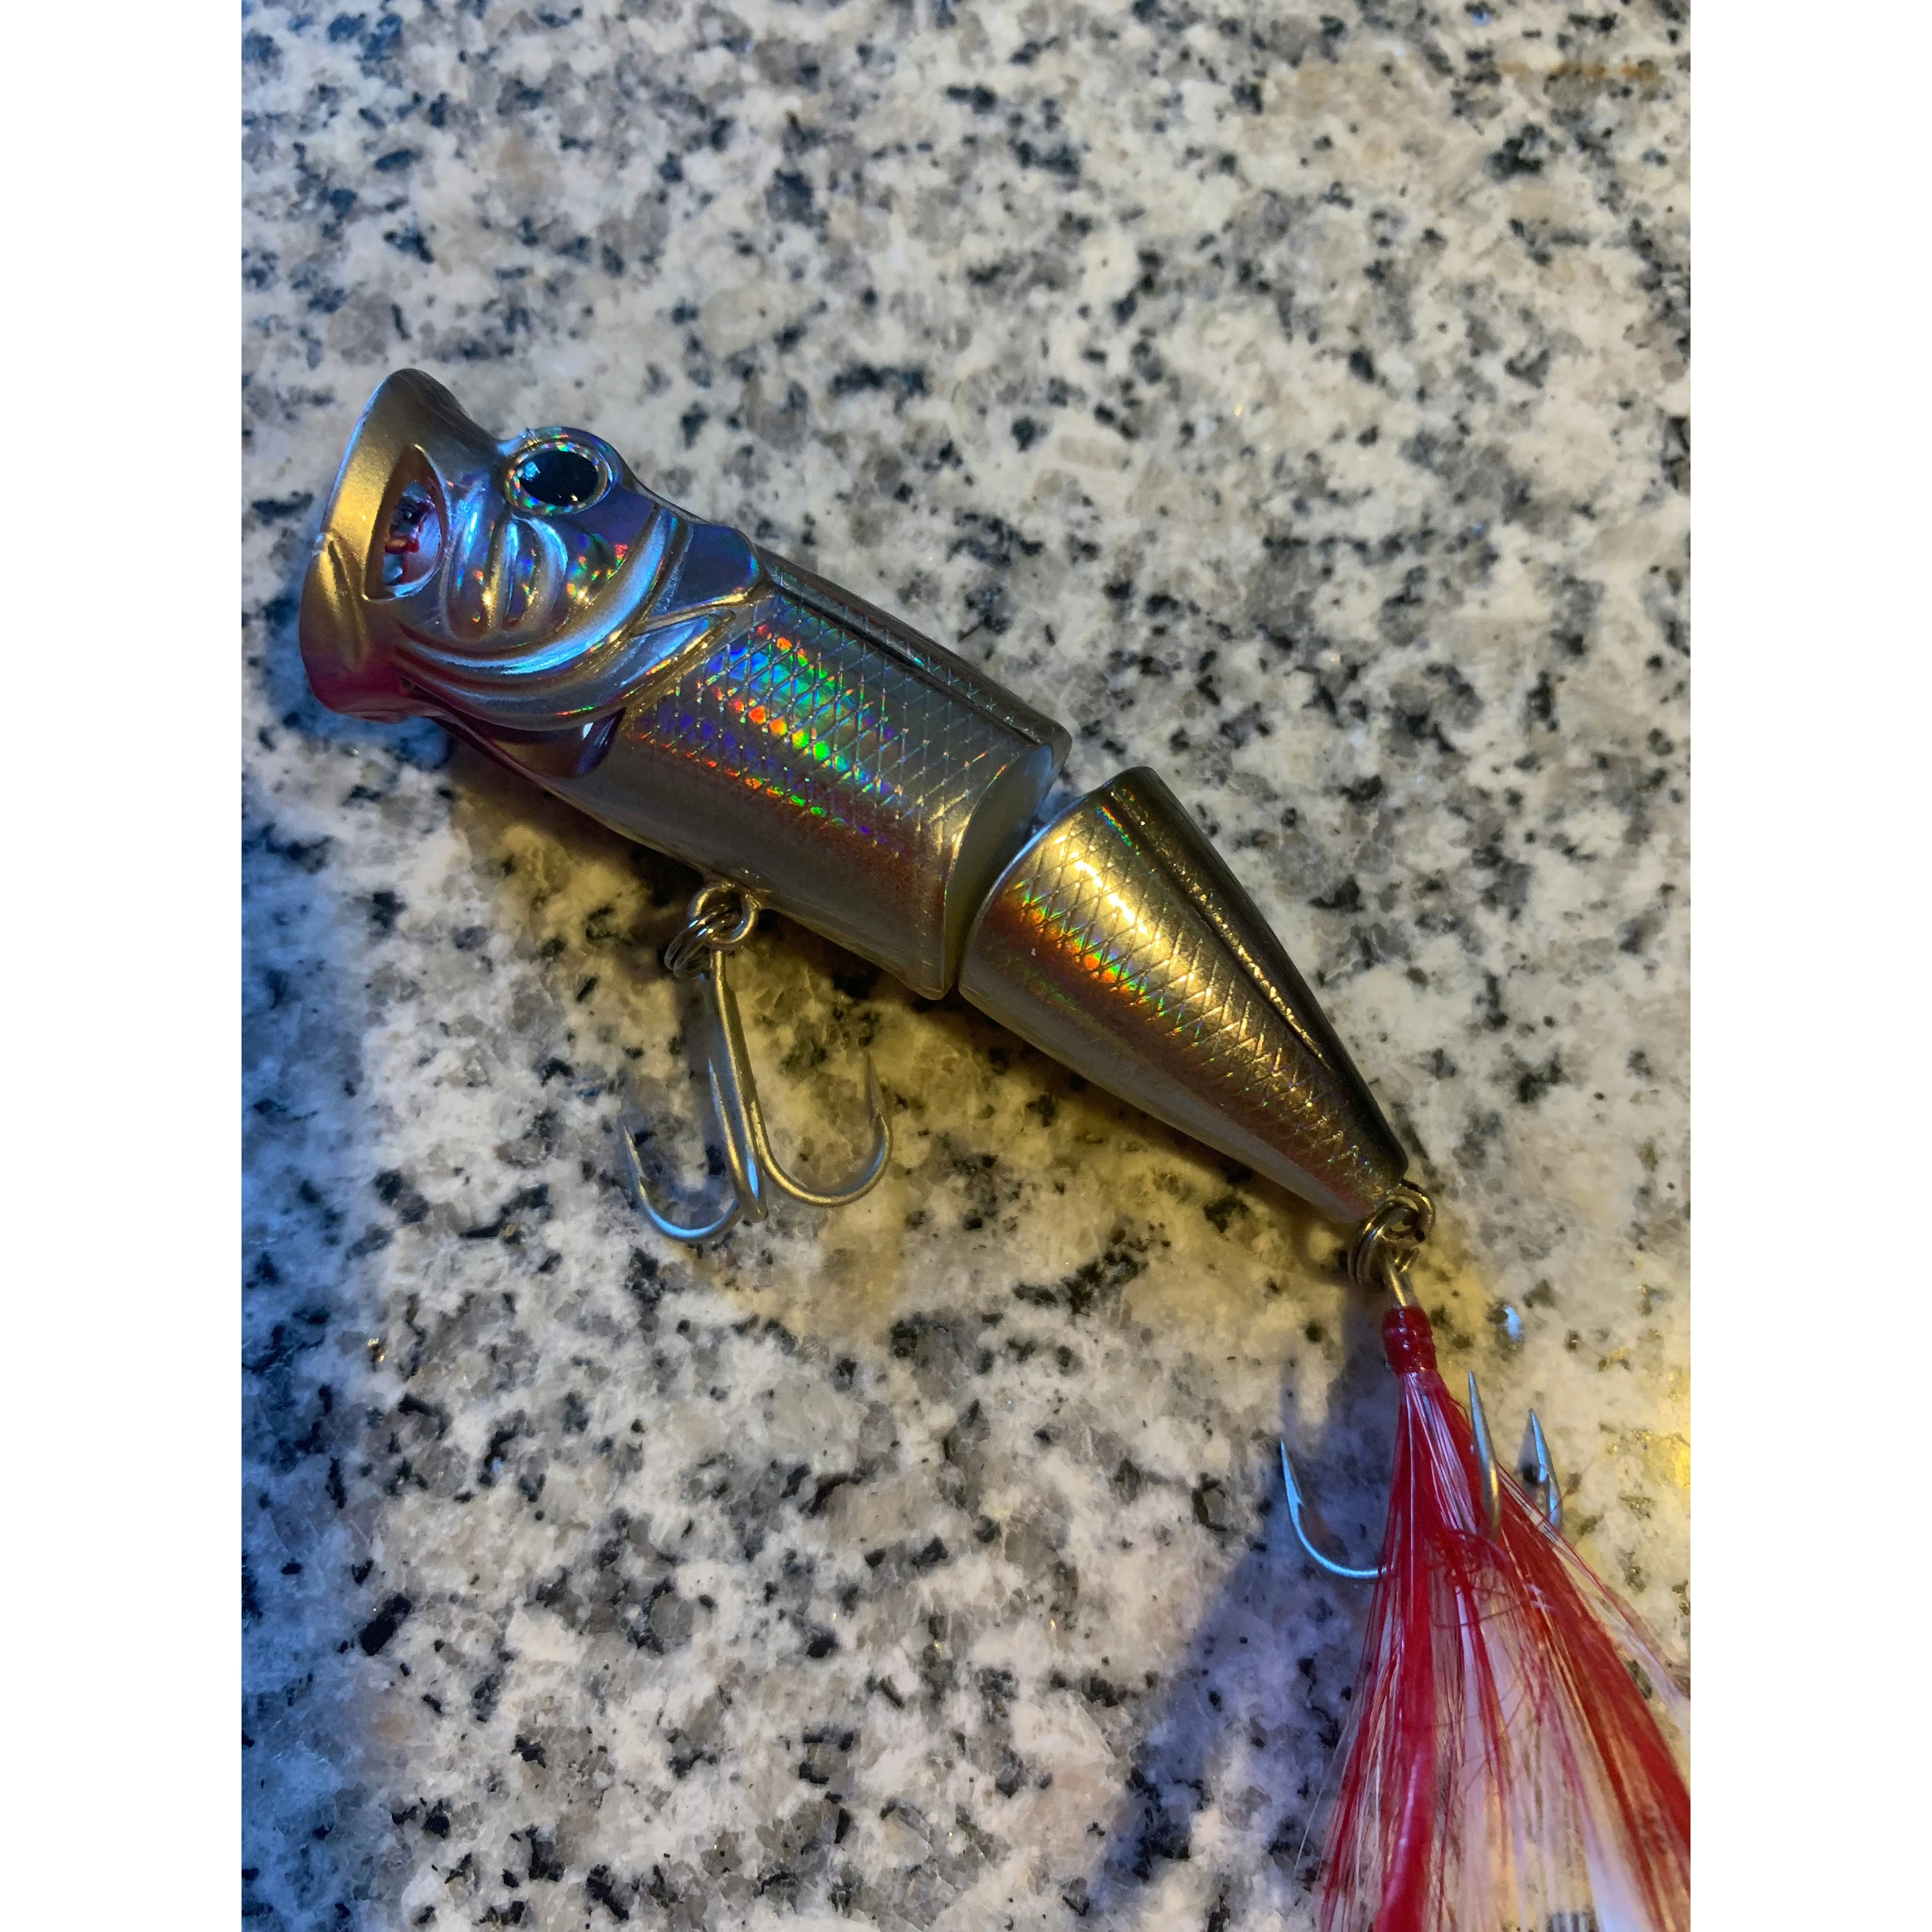 Hard body top water jointed popper 90mm 11g